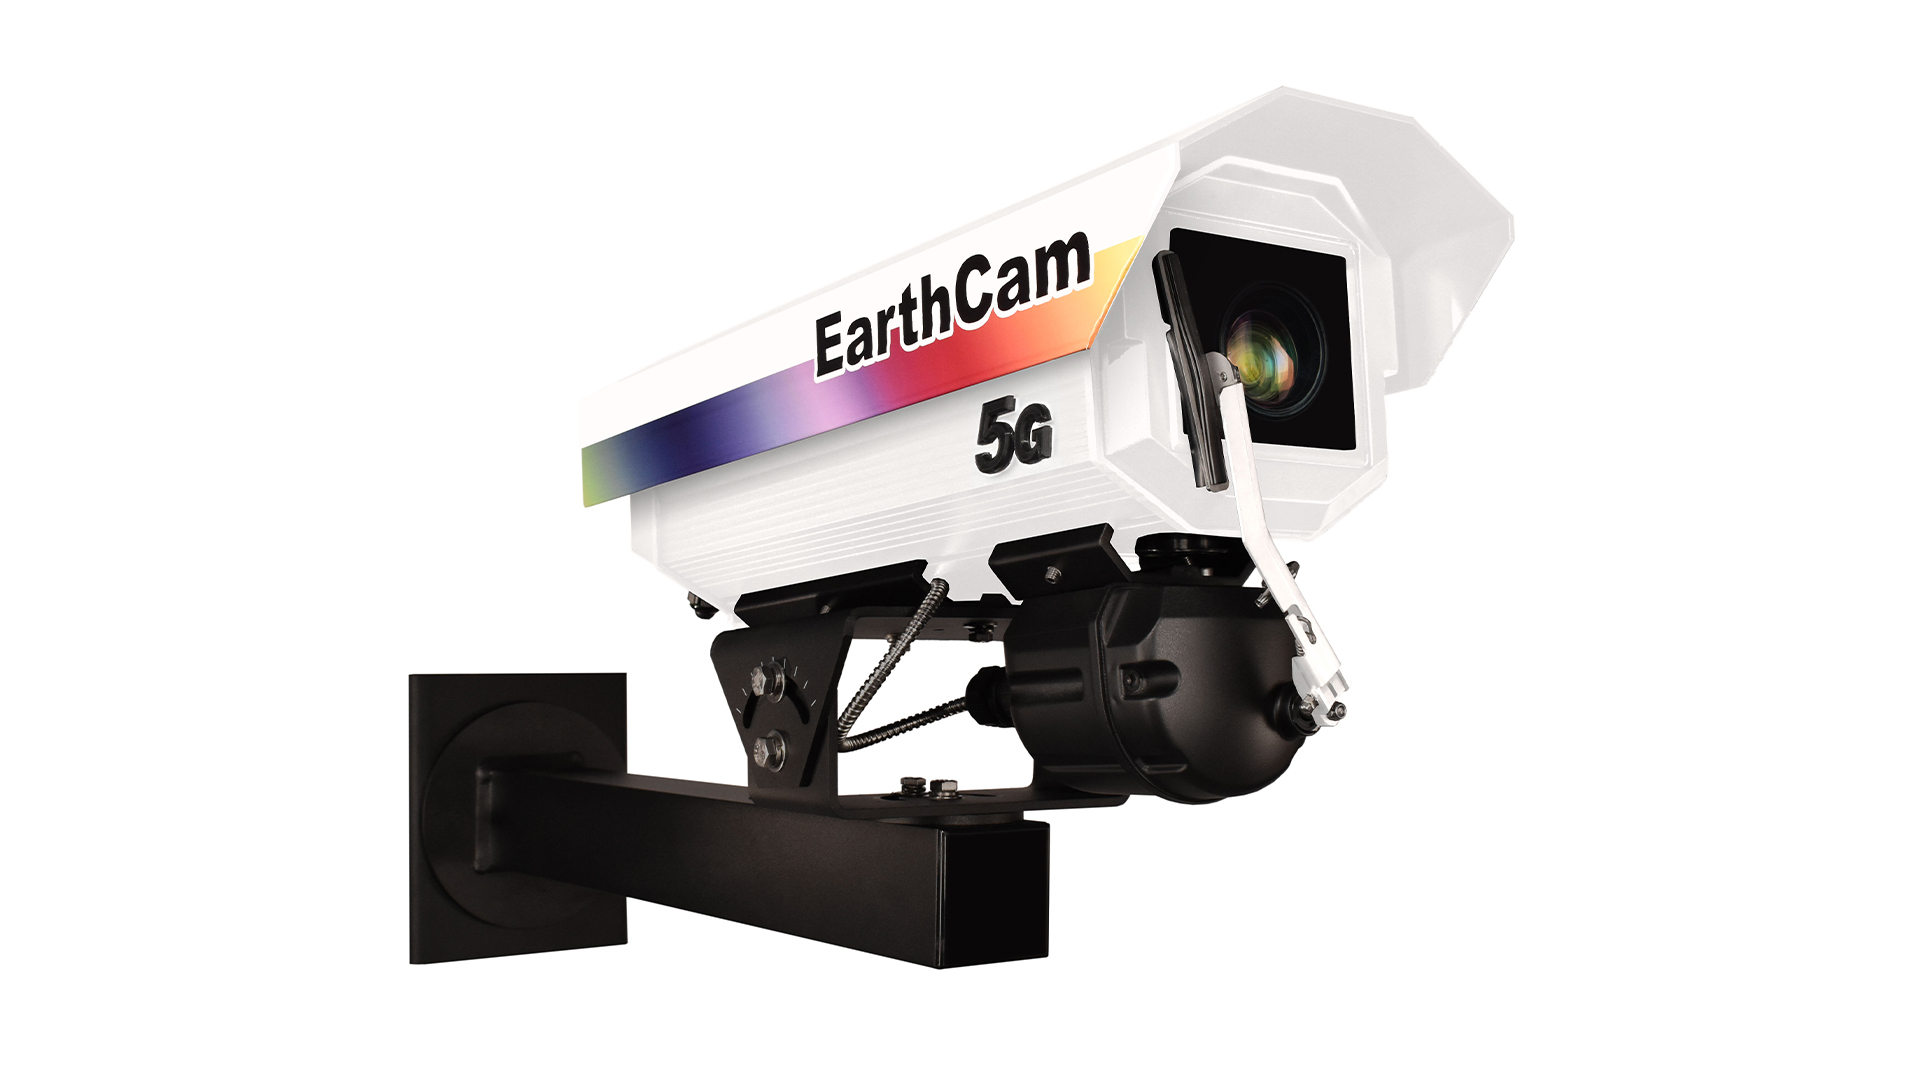 EarthCam Announces the World's First 5G Multi-Network